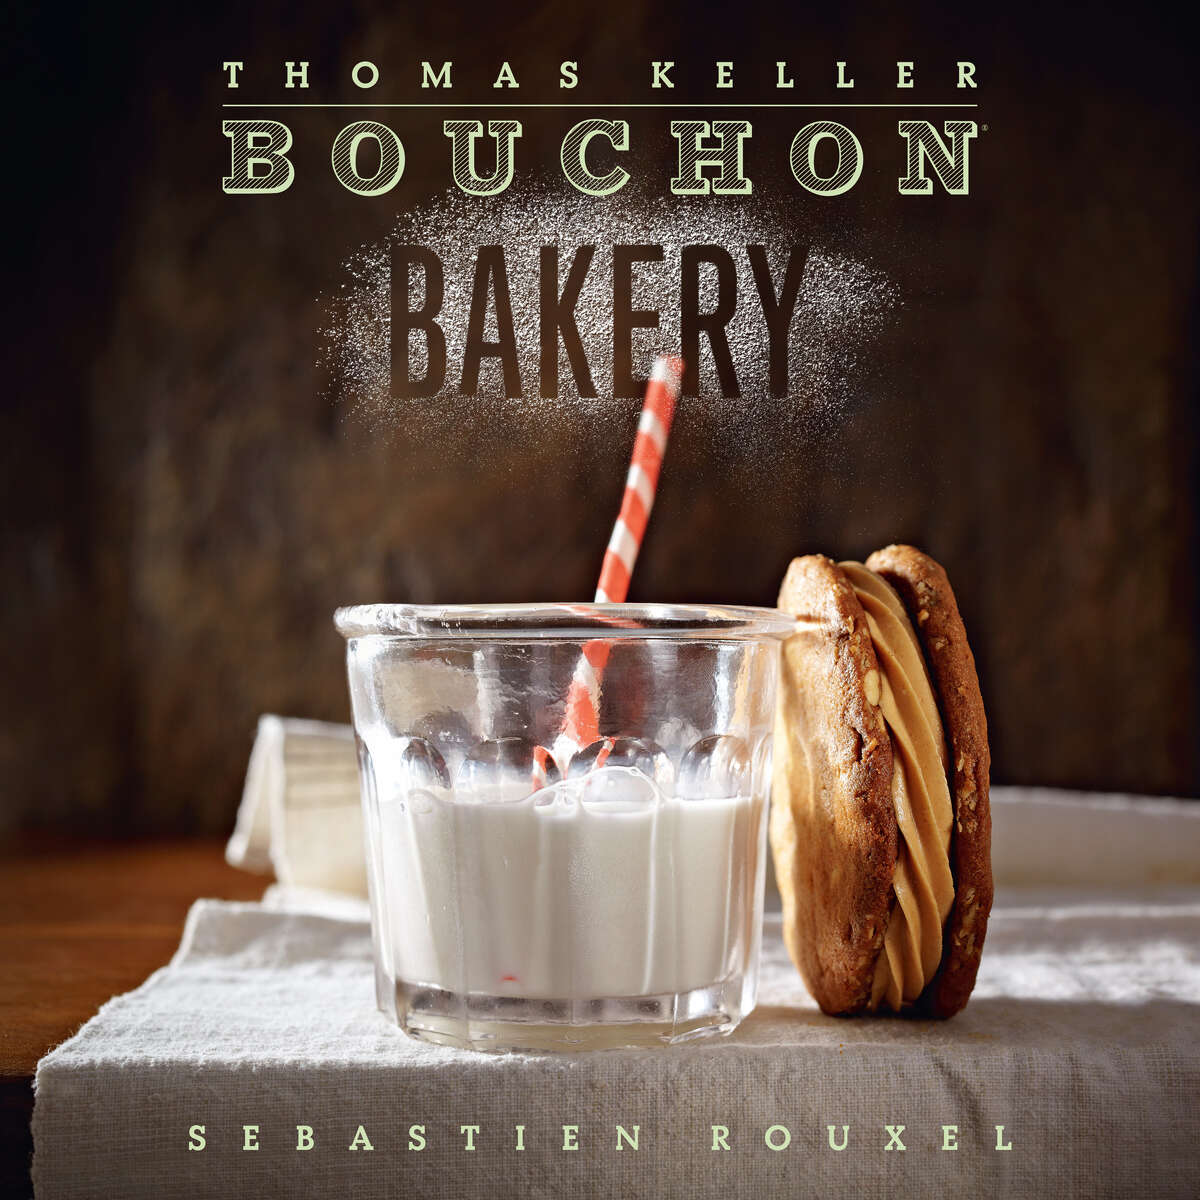 "The Bouchon Bakery cookbook that just came out is a fantastic cookbook for bread-making and dealing with just the sweets."